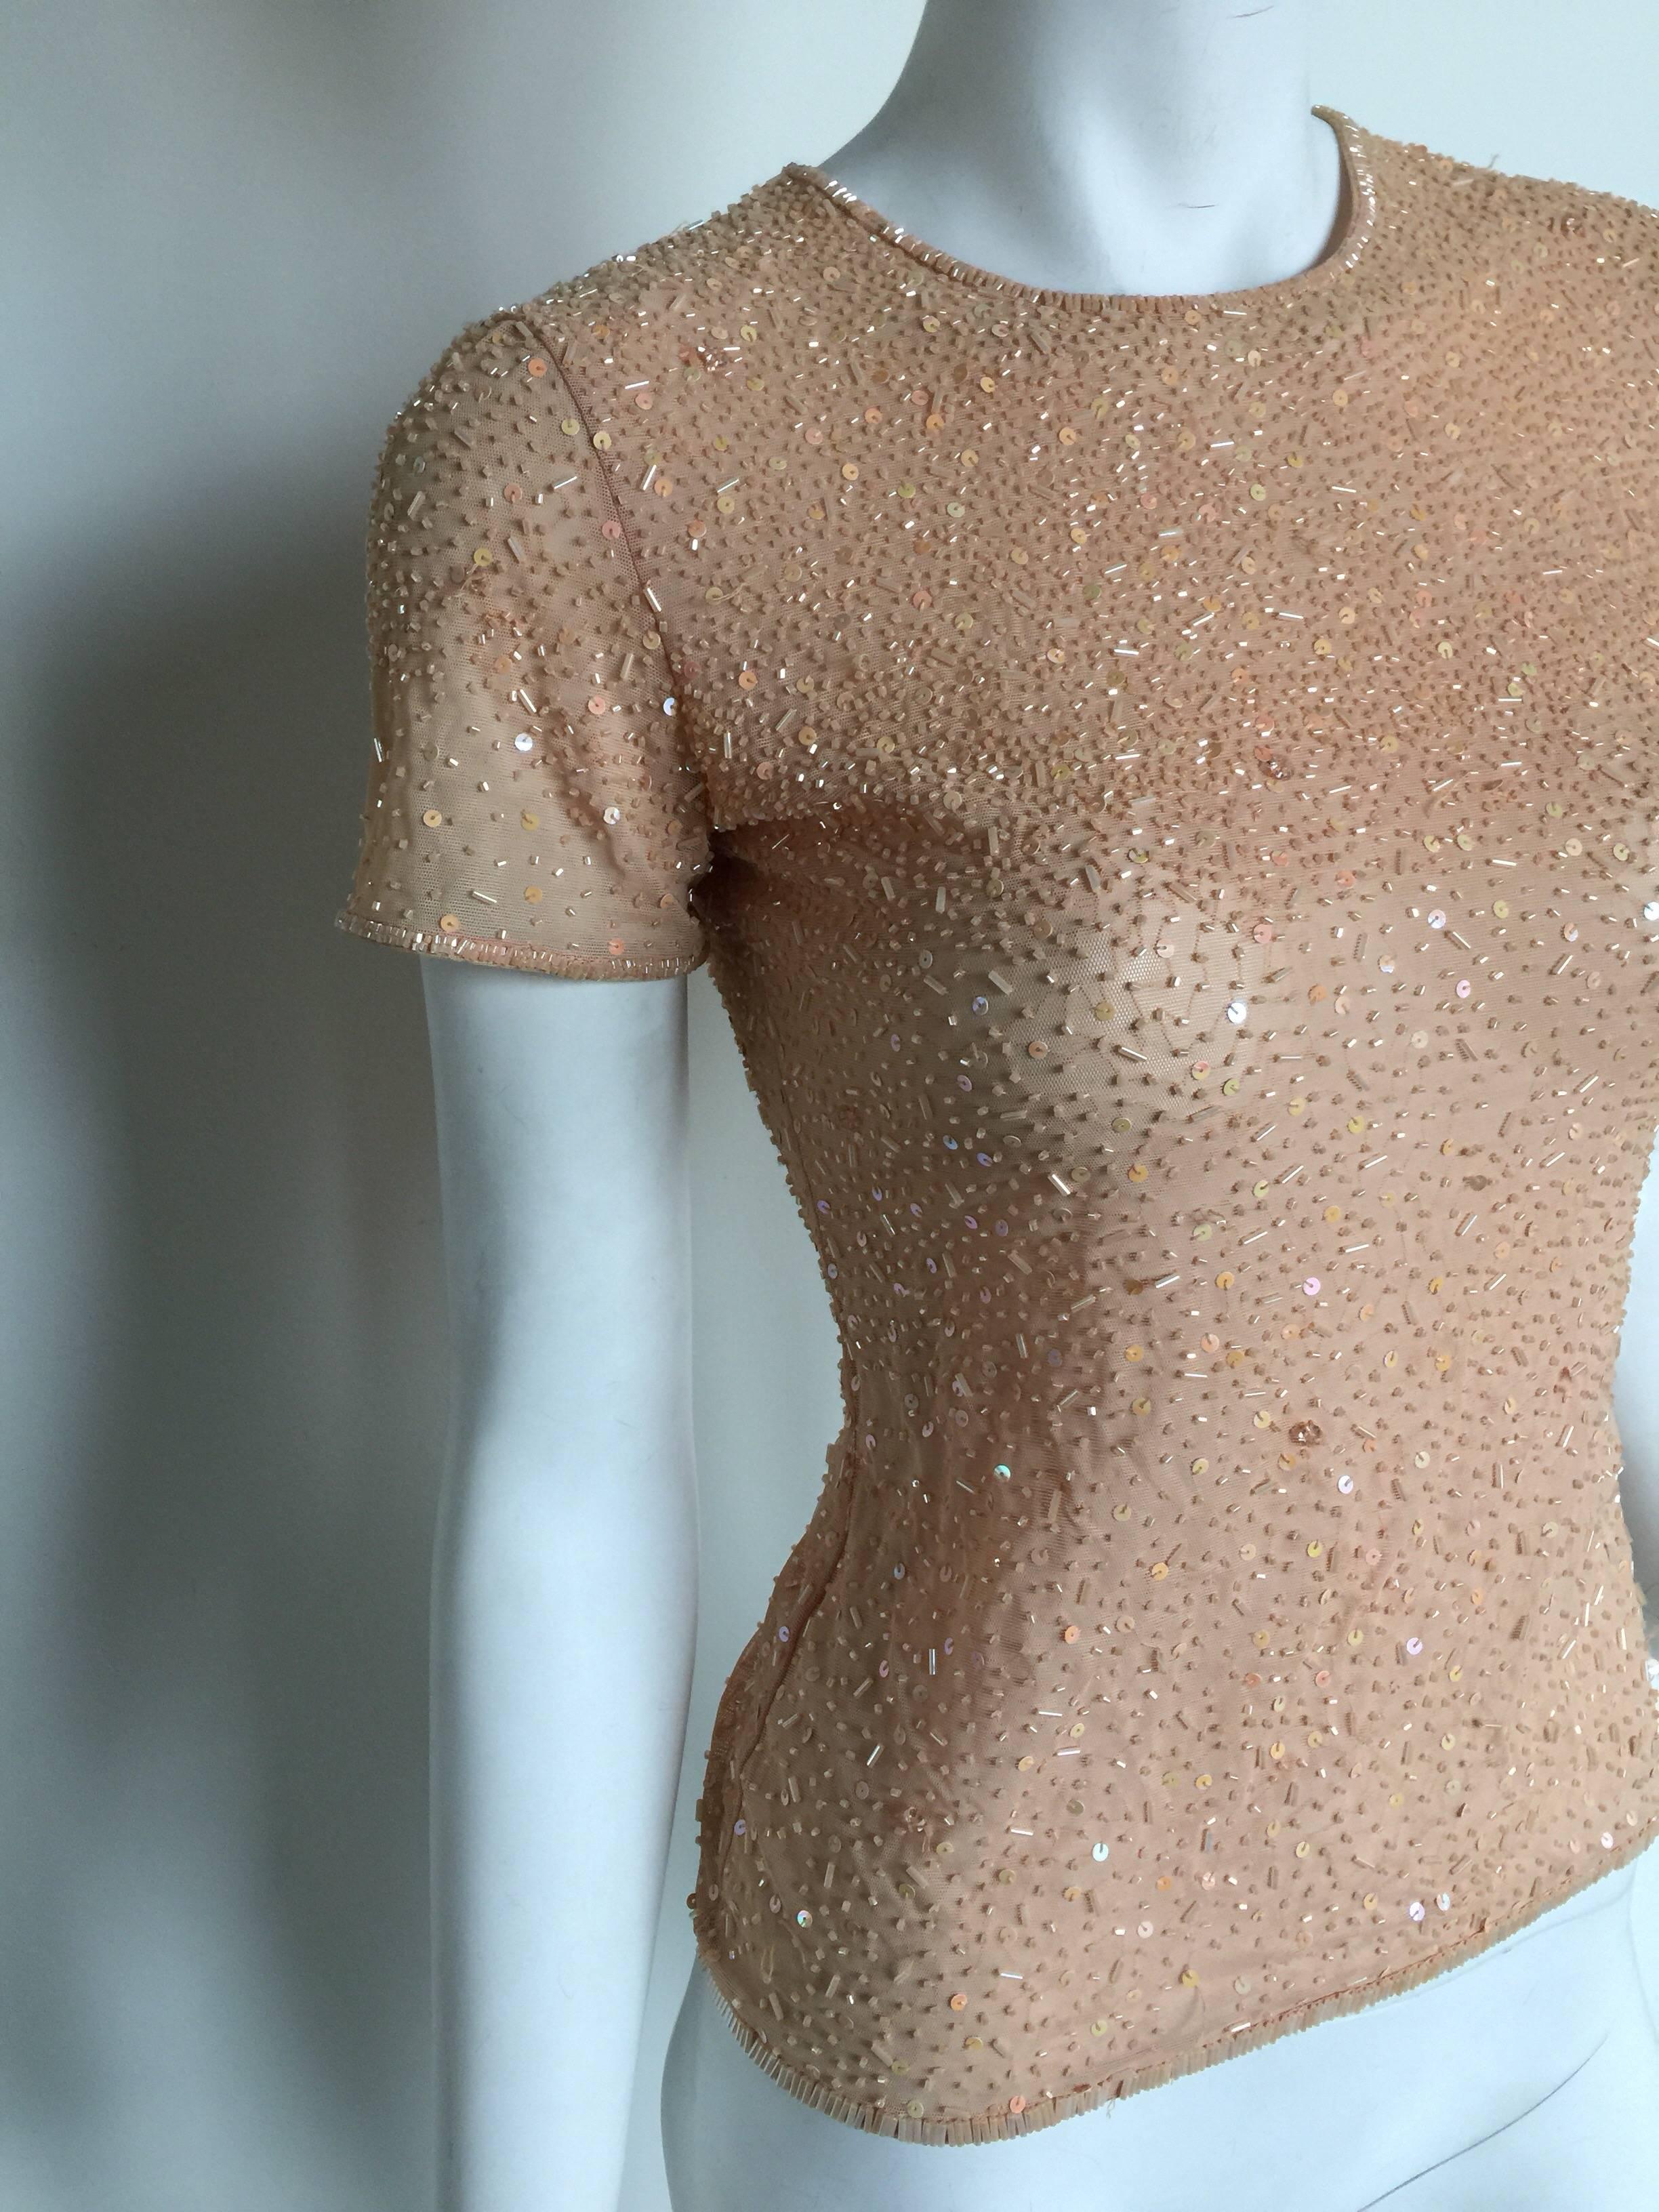 Armani Nude Beaded Top fits a 0-4.  It has some missing beads on the front chest and is priced accordingly. It is very stretchy.